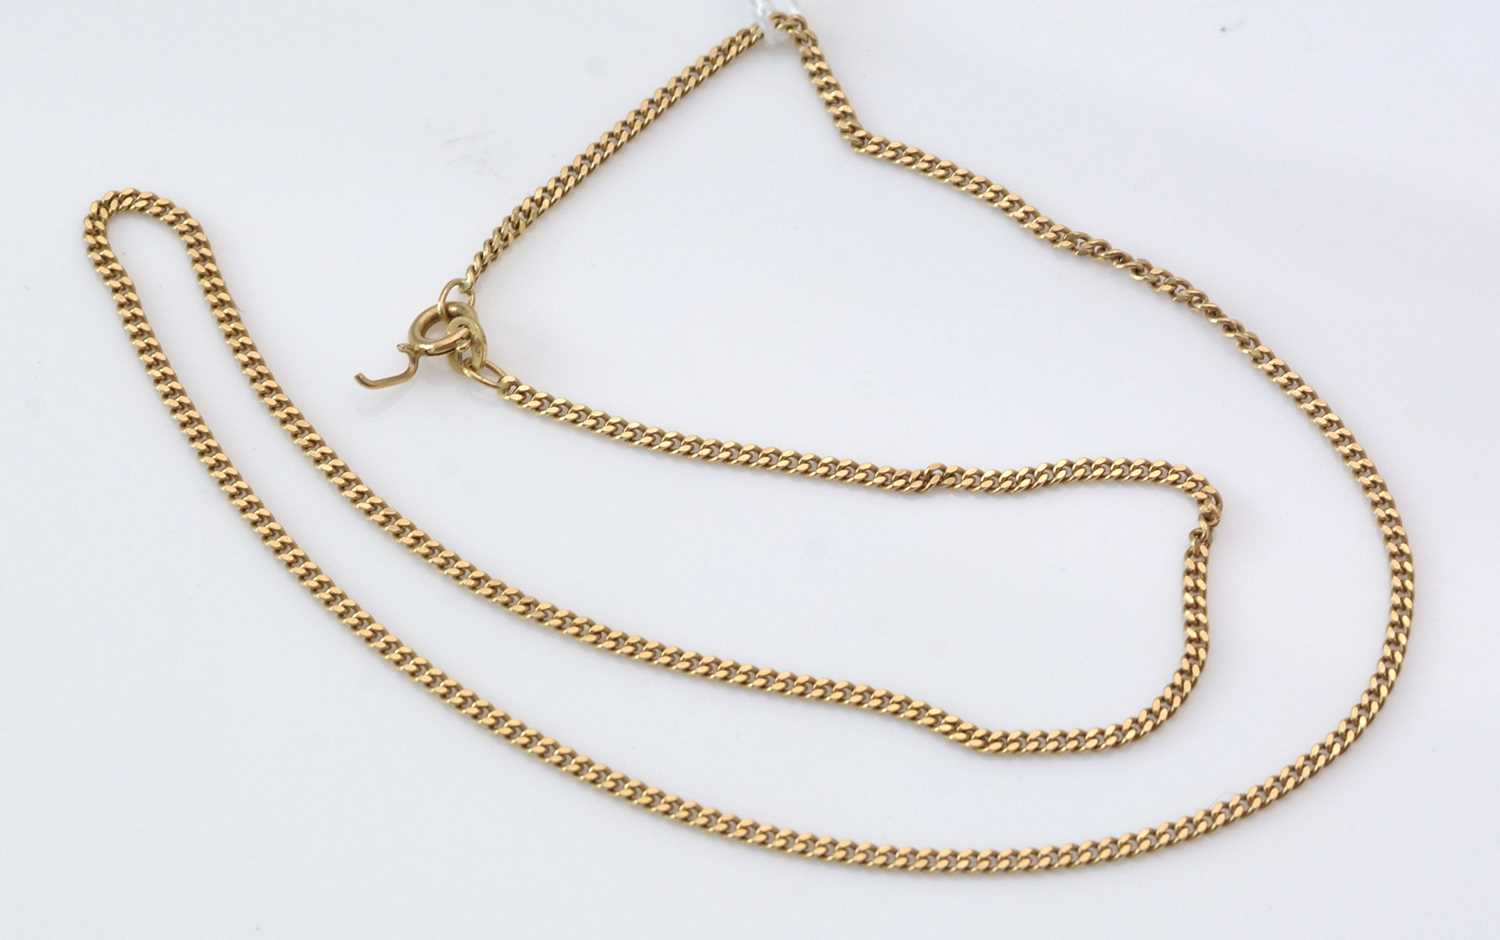 Lot 285 - 18ct. yellow gold chain necklace.